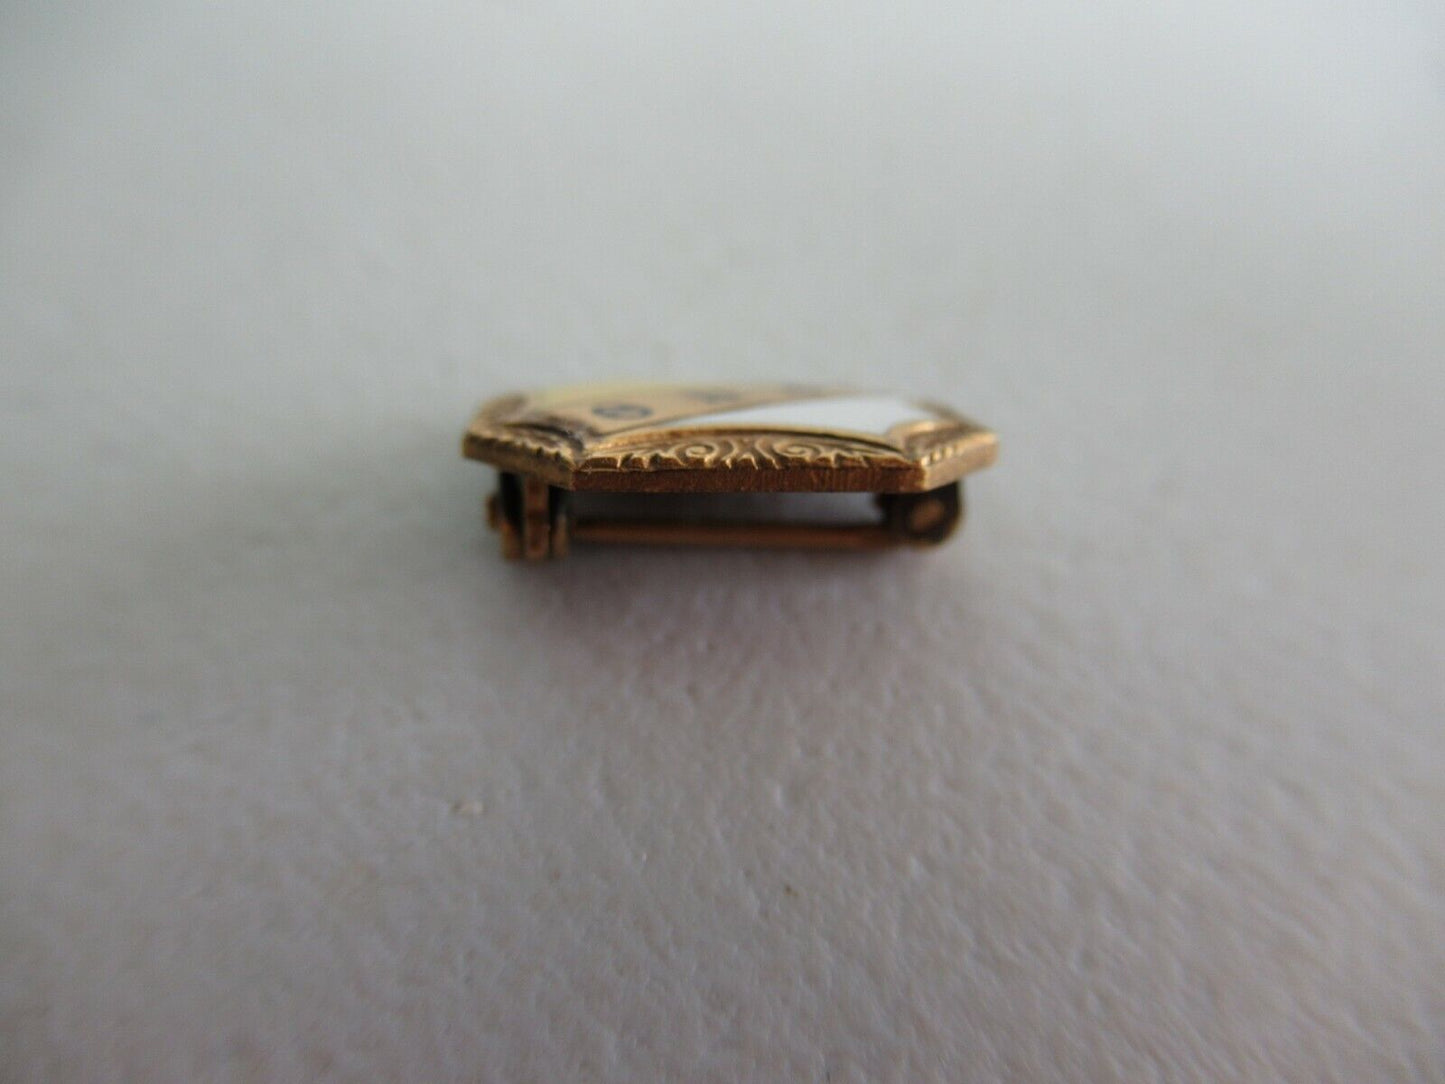 USA FRATERNITY PIN PHI PI THETA. GOLD FILLED. MARKED. 889